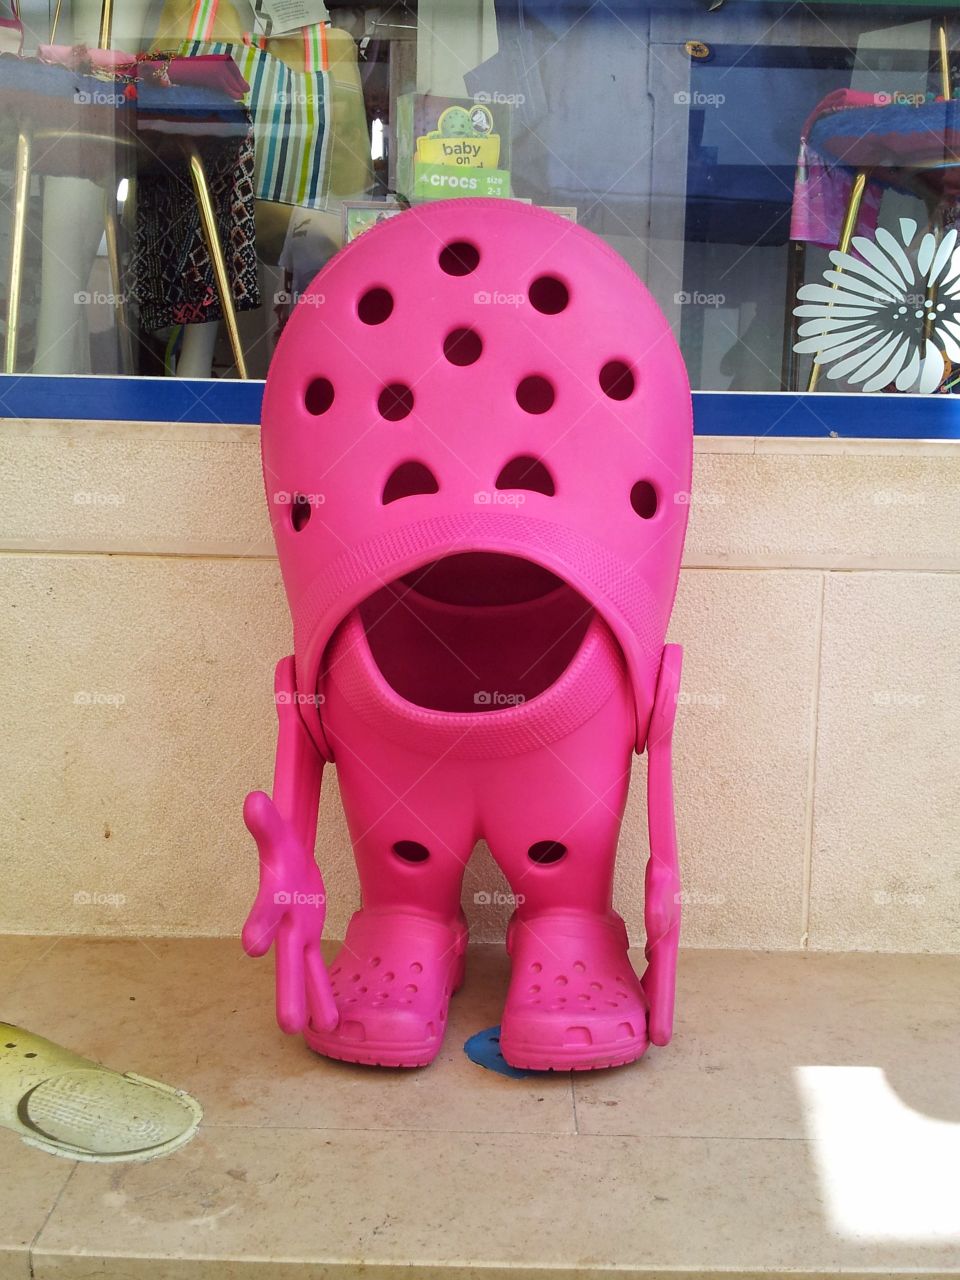 CROCS. crocs at a store in Ericeira - Portugal